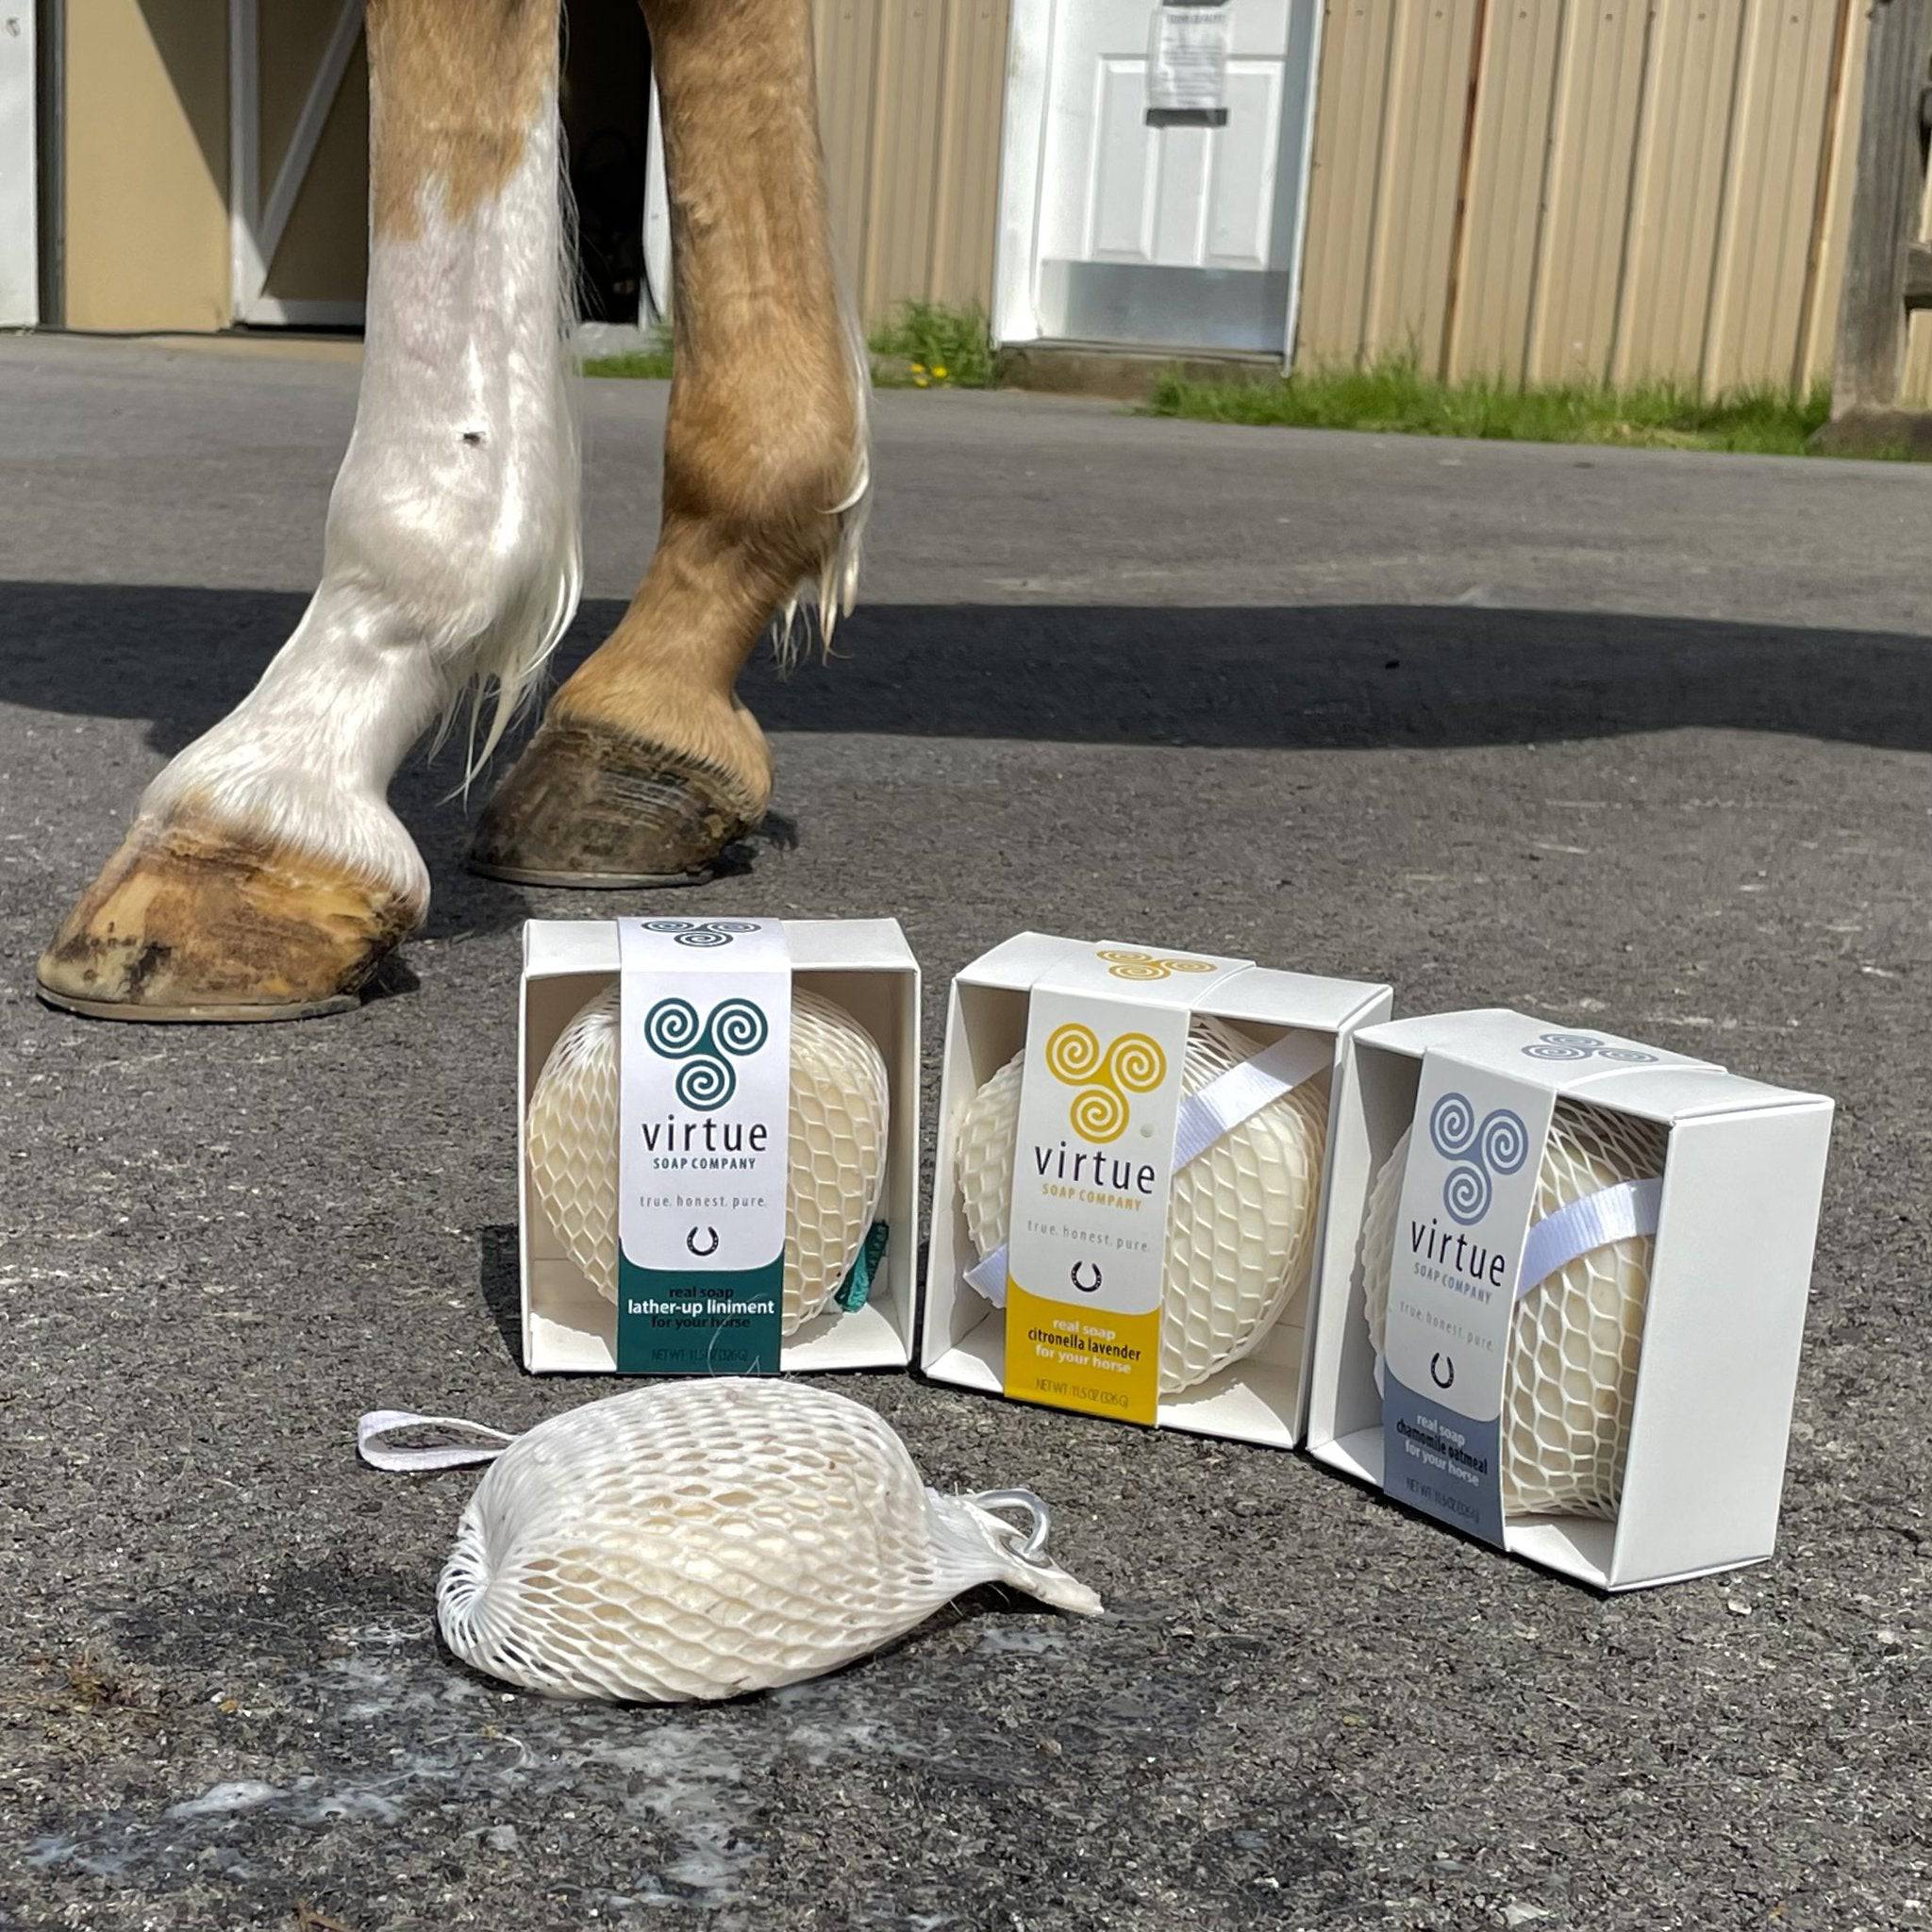 Virtue Soap for Horses